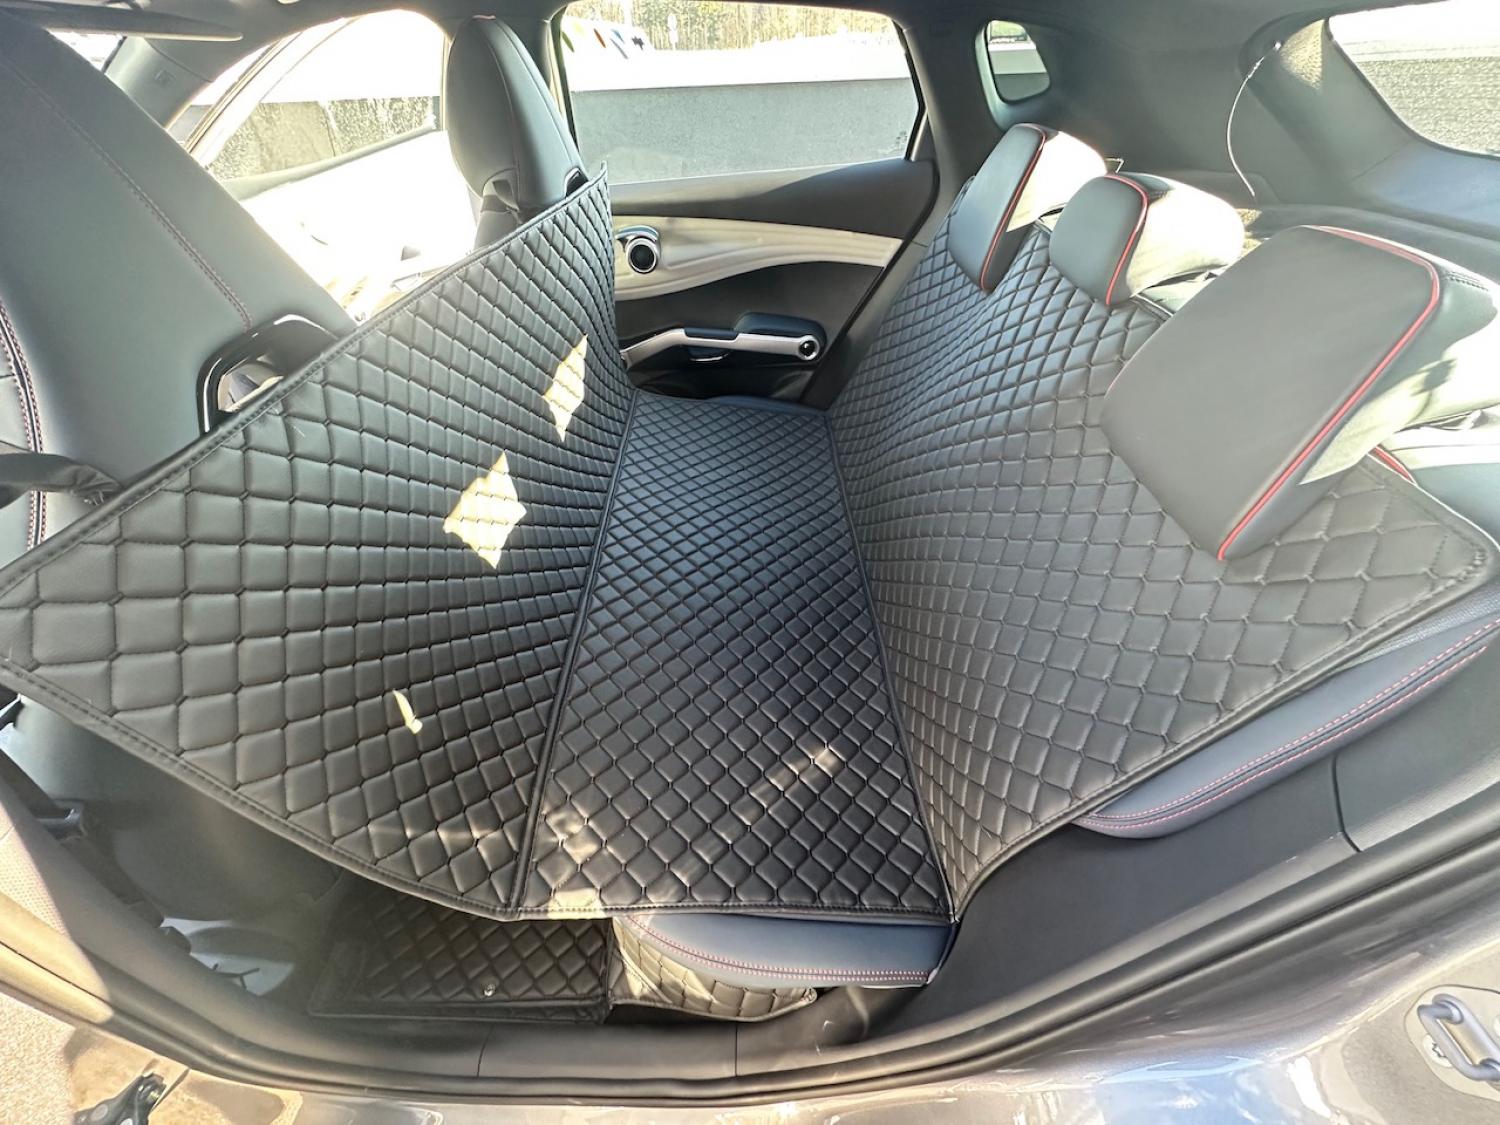 CARSTYLER® Back Seat Cover Geeignet Für Audi A5 F53 Cabriolet 2016-heute